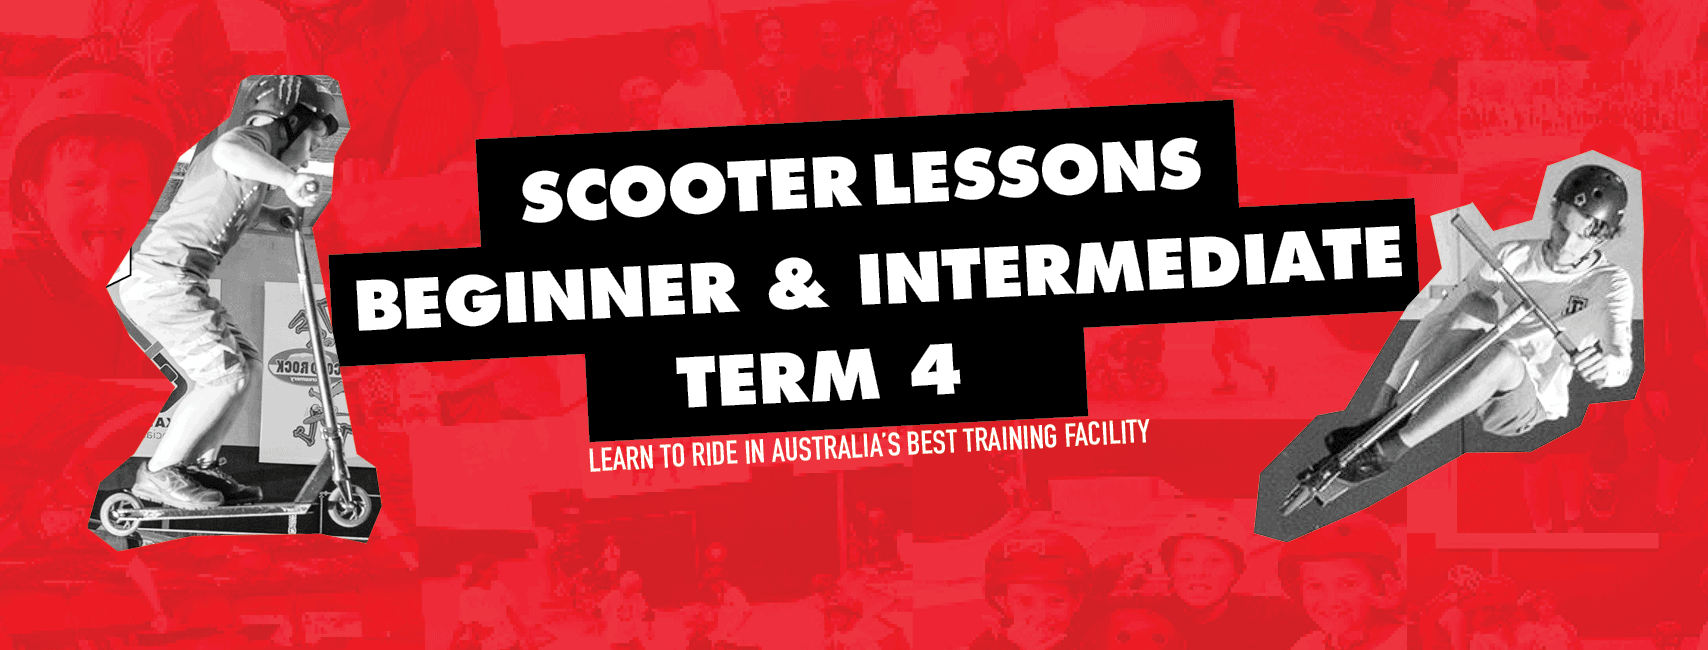 Level Up Term 4 Scooter Lessons